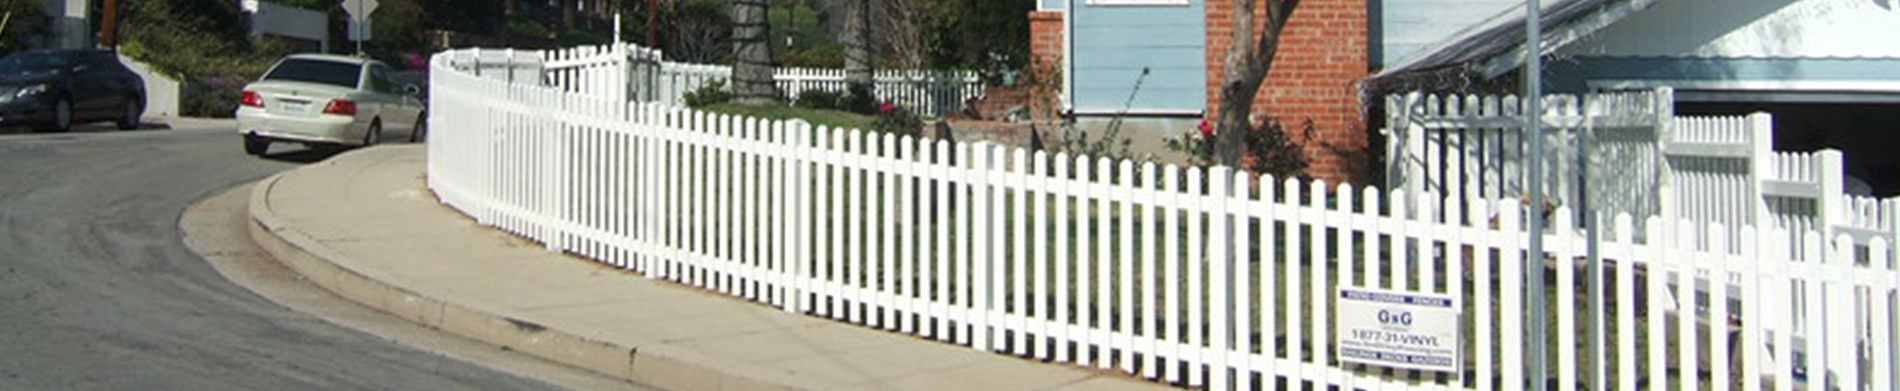 Maintain The Wooden Look Of Your Fencing With Duragrain Privacy Fences